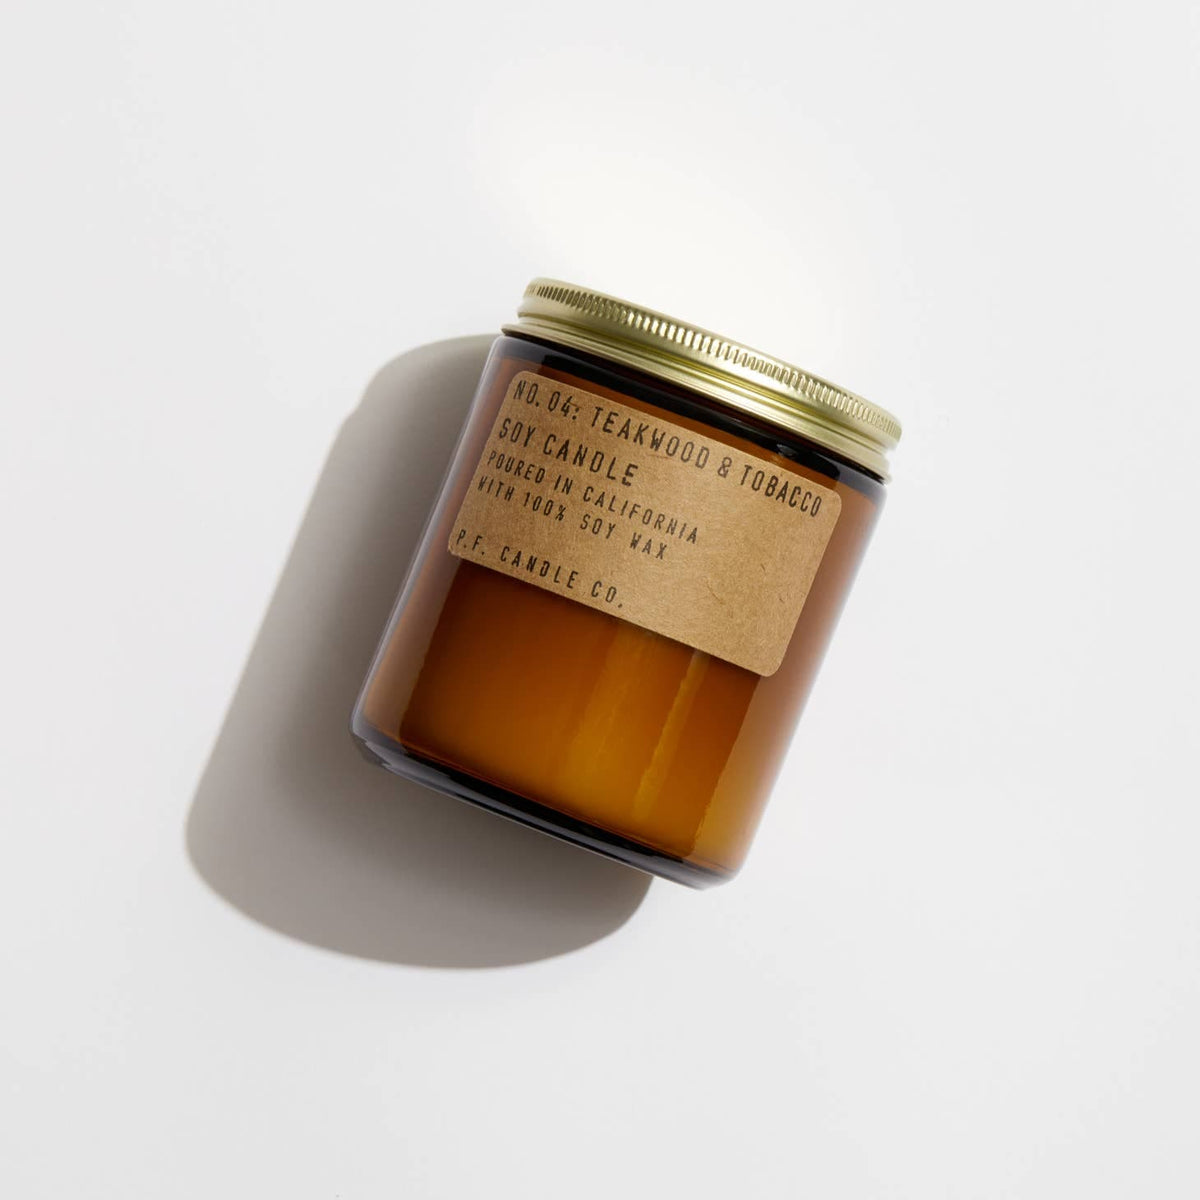 P.F. Candle Co Teakwood &amp; Tobacco Soy Candle